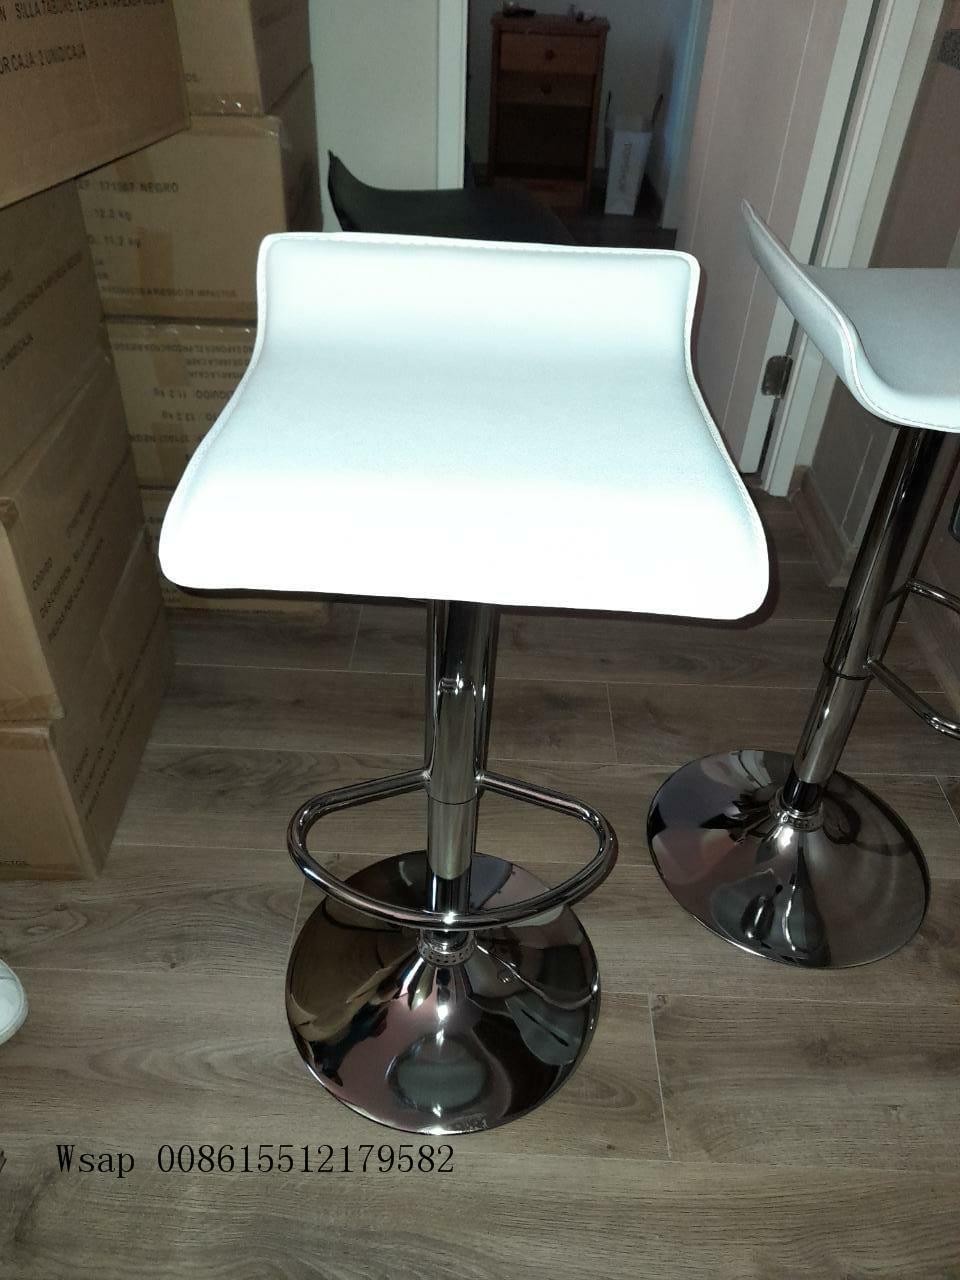 Furniture Factory of Seatings High Barstool Garage Chromed Bar Chair with Low Back